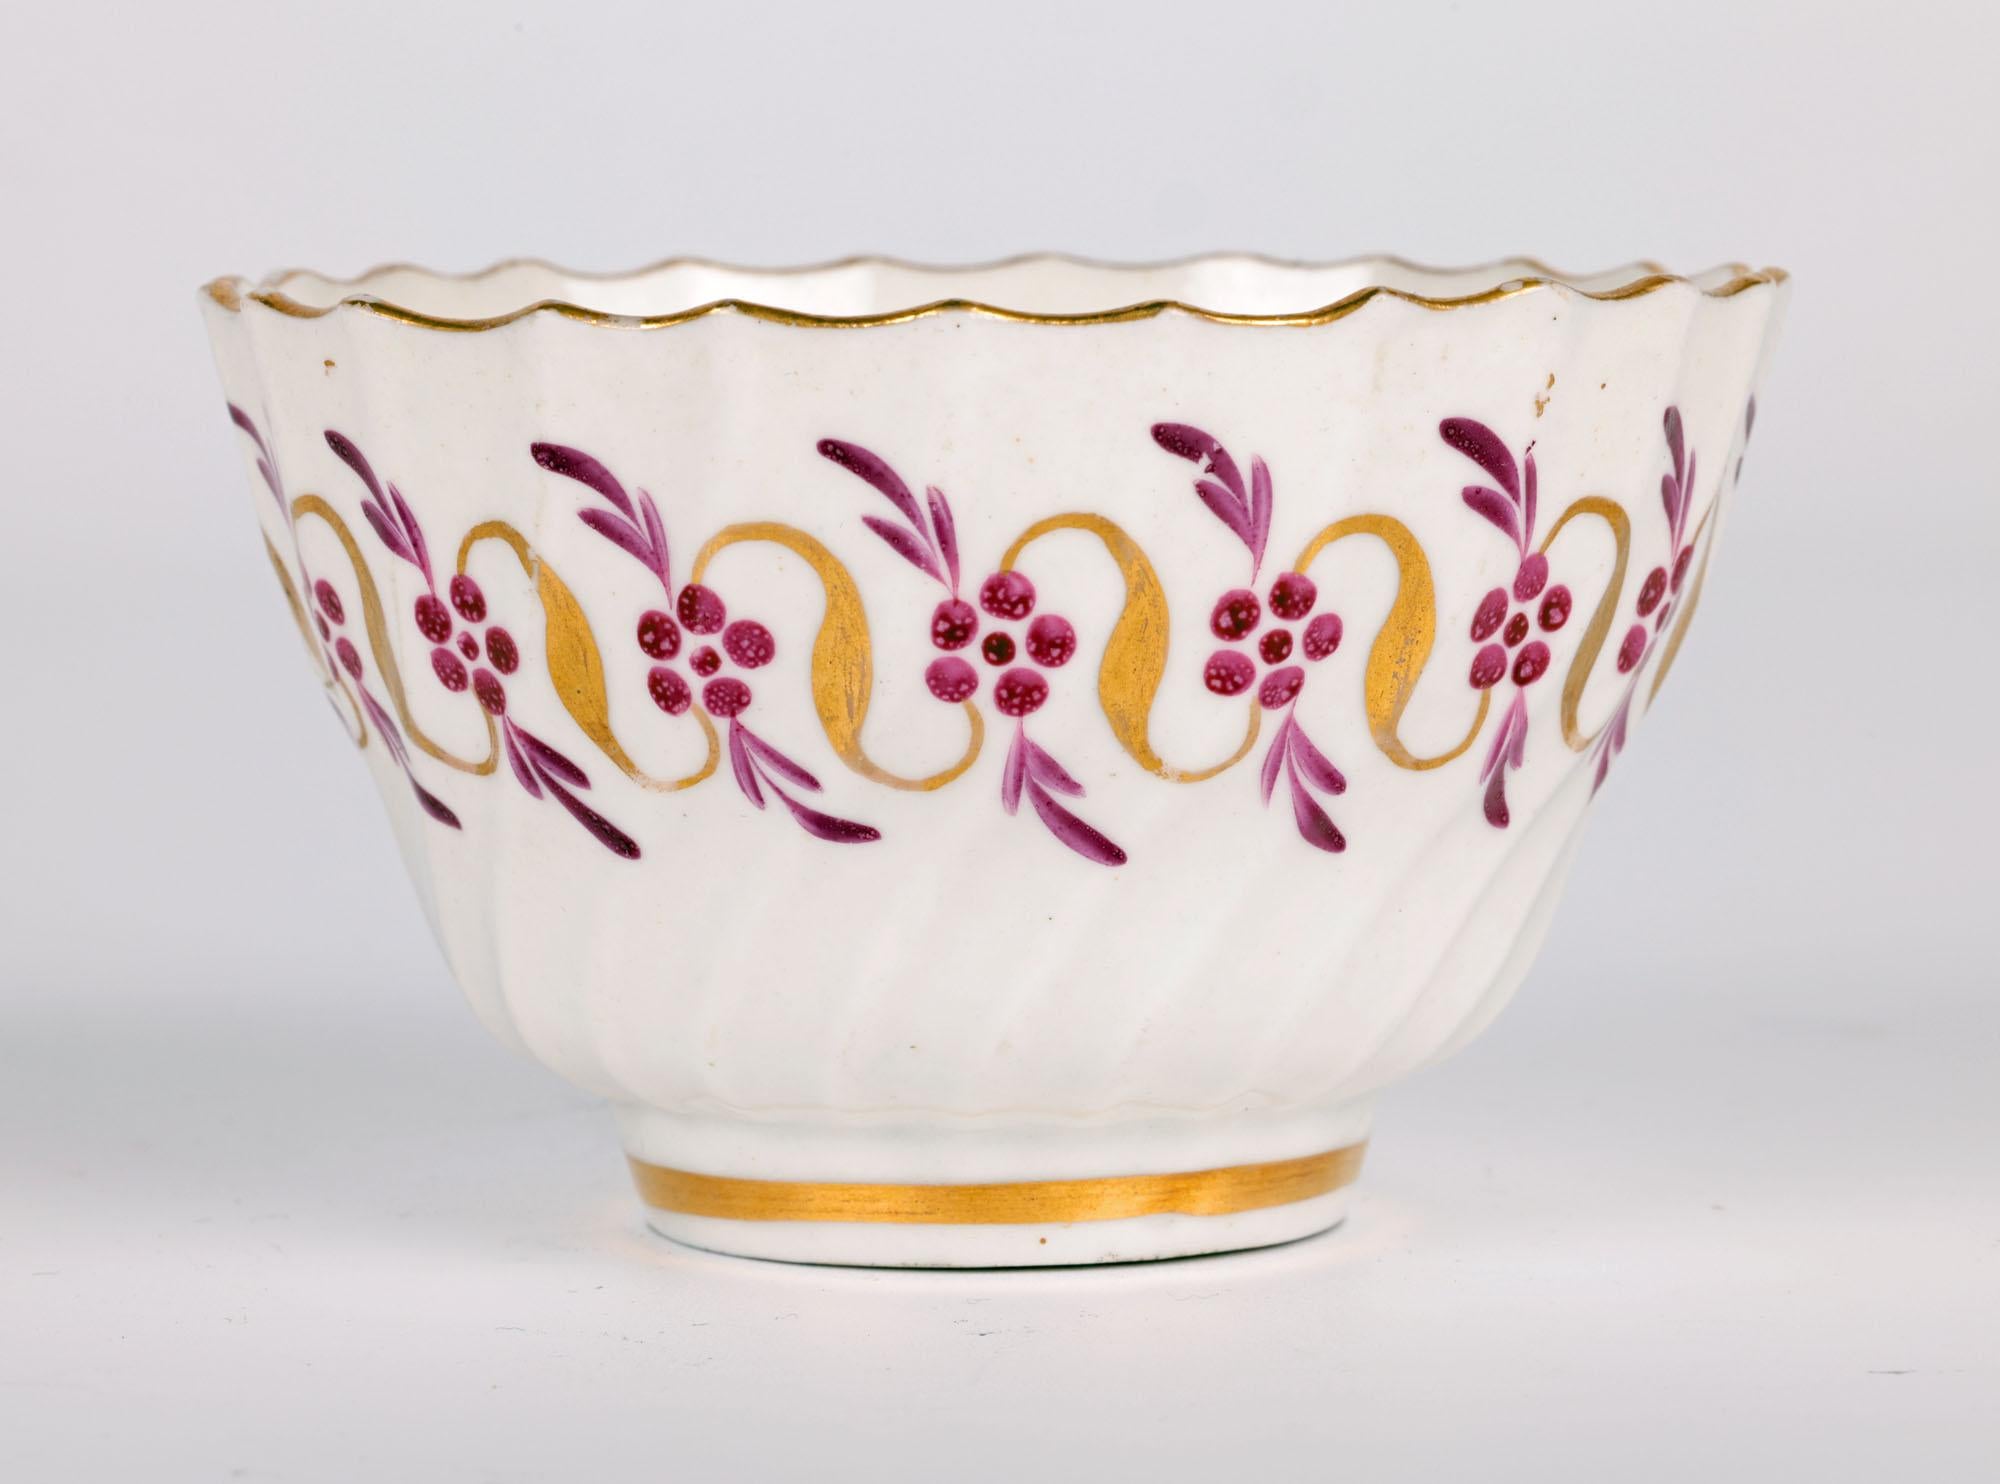 A rare and early antique English hand painted porcelain tea bowl and saucer made by the renowned Worcester Flight factory and dating from around 1780. The tea bowl and saucer are made in white porcelain with a matching ribbed patterning to the